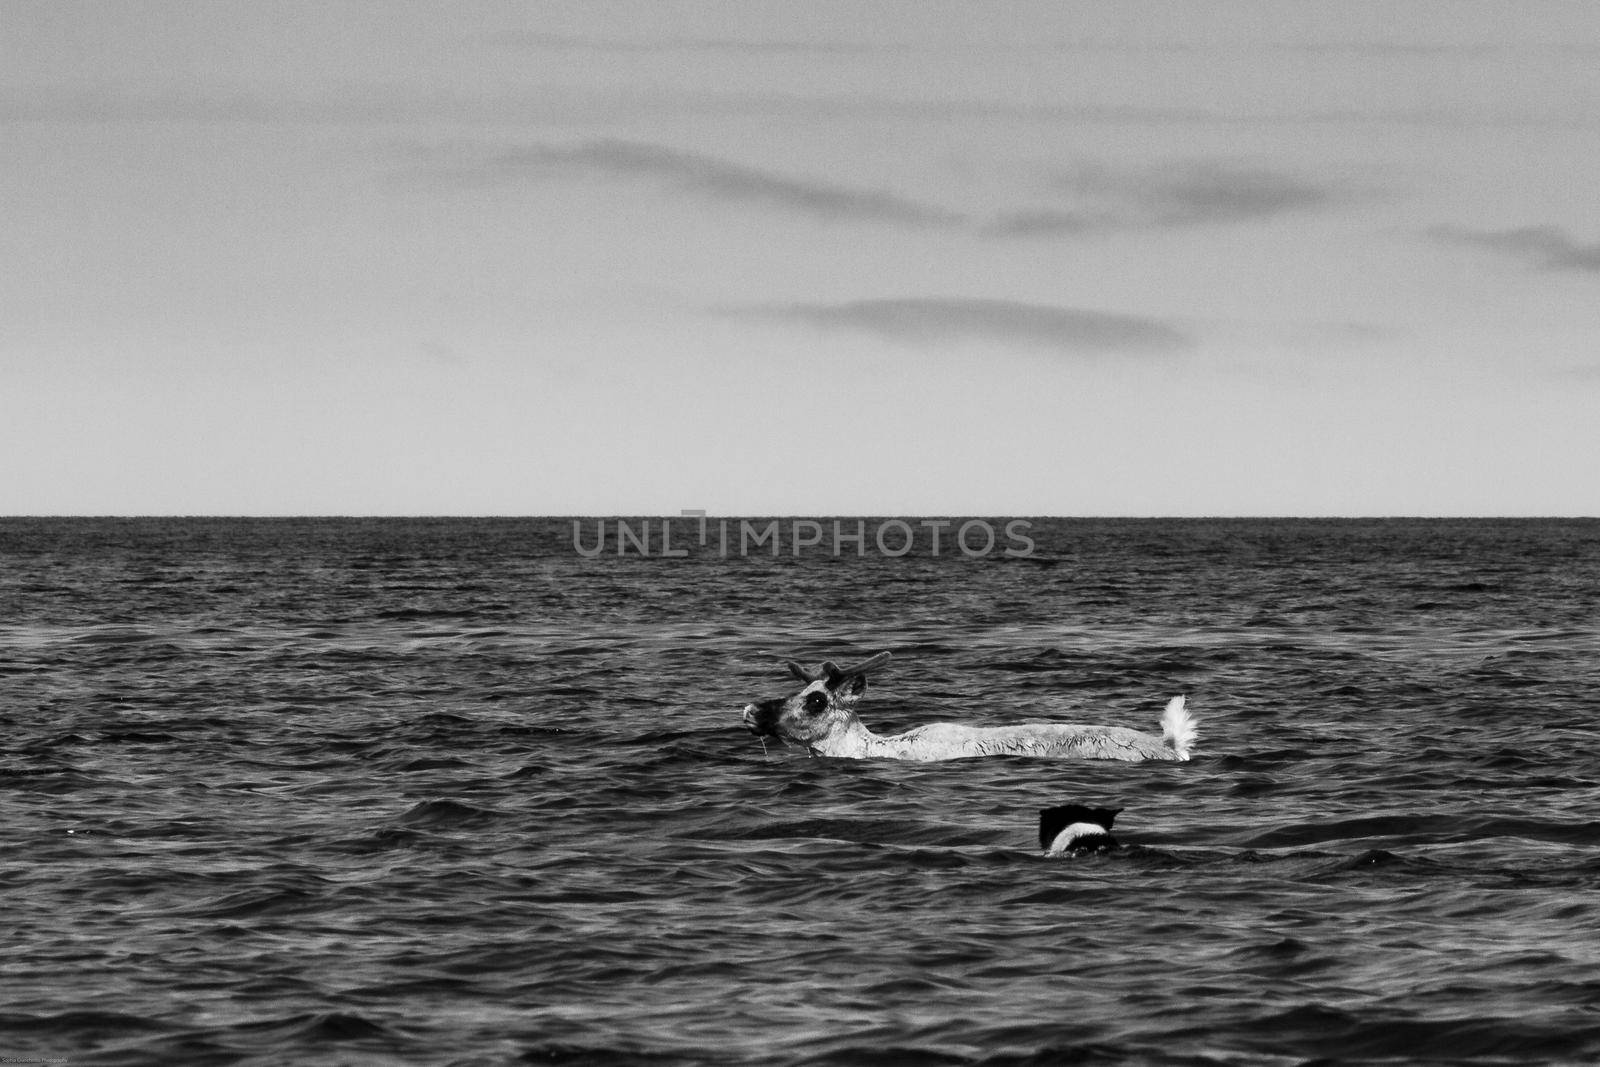 Black and white of a young barren-ground caribou swimming through water with a dog chasing by Granchinho